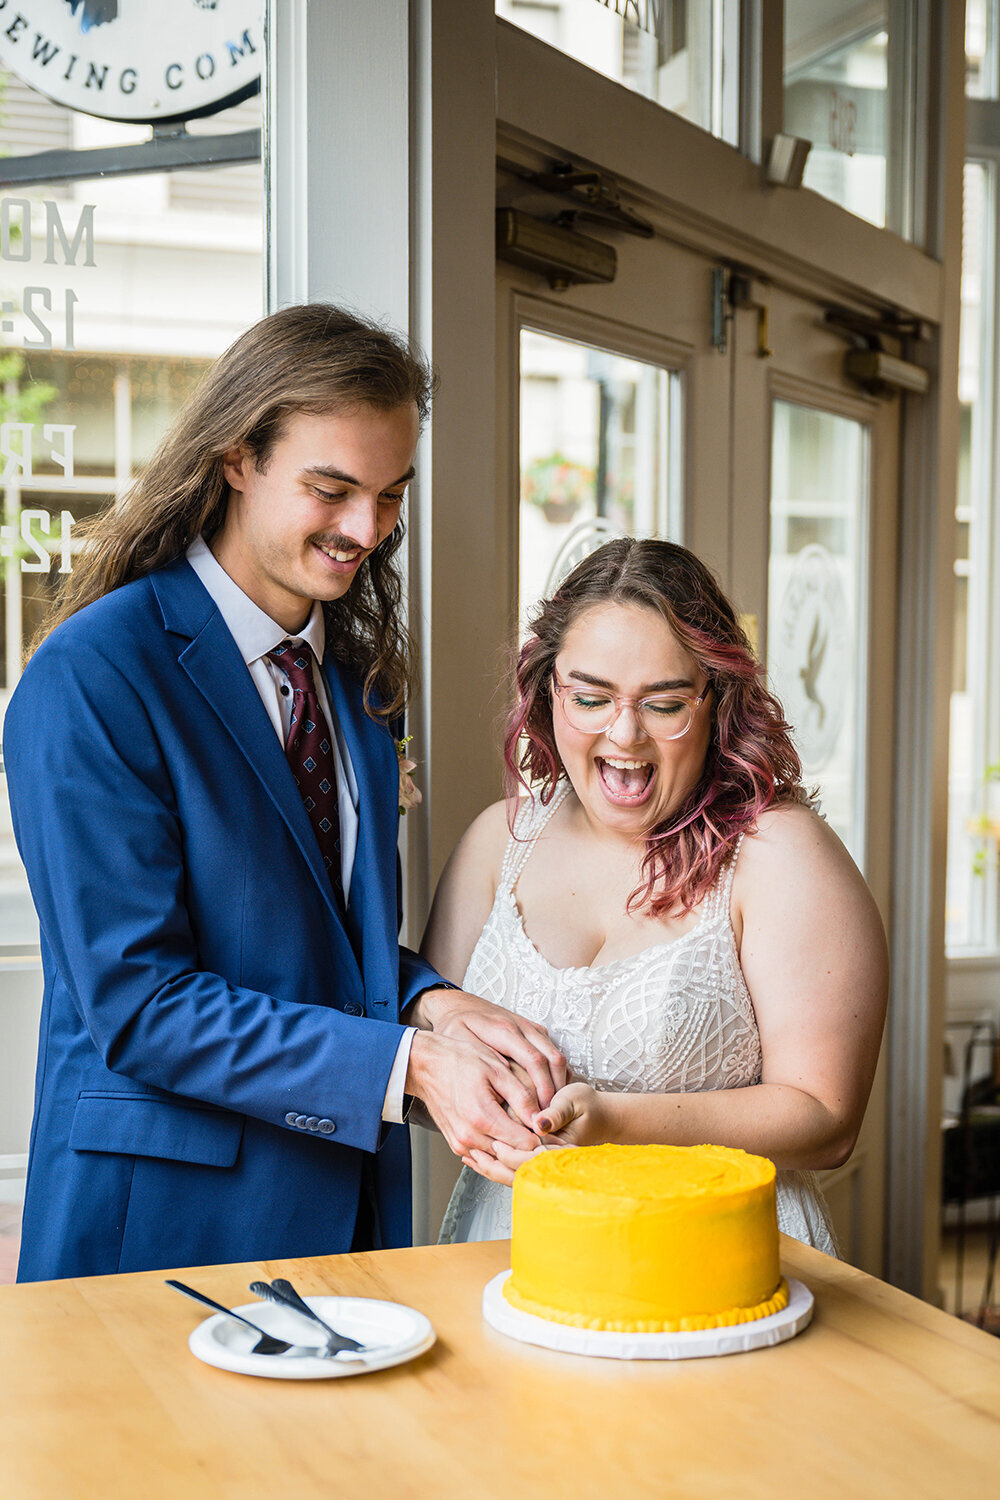 A couple holds onto a knife together to cut into a vibrant yellow cake on a long table inside of Olde Salem Brewery in Downtown Roanoke. The pair smile and laugh excitedly as they cut into their cake.